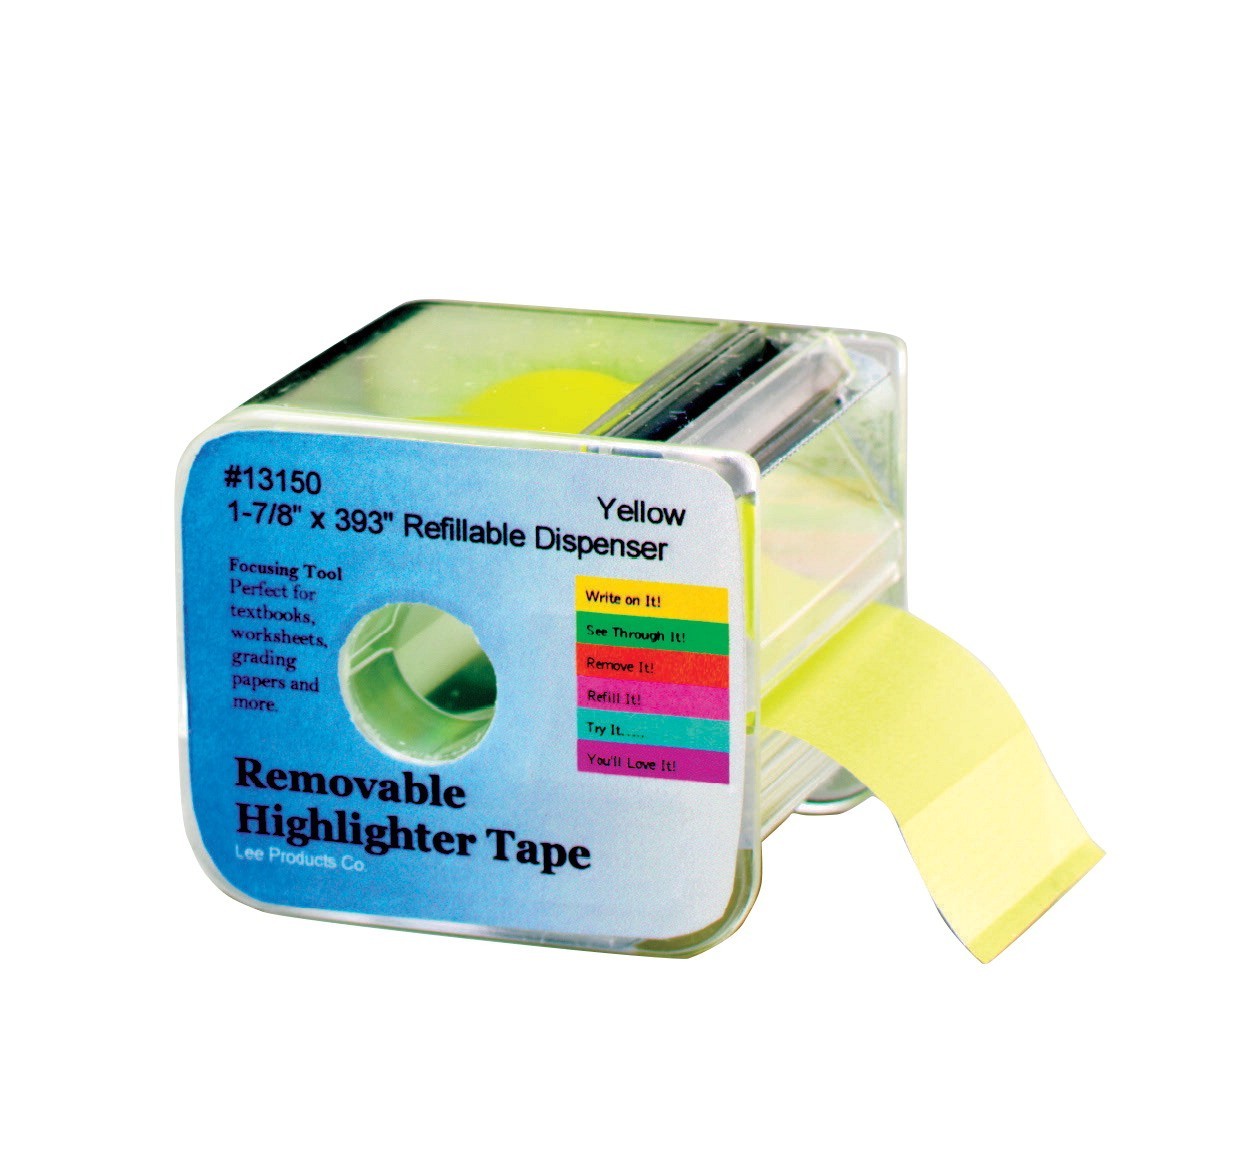 1-7/8" x 393" Lee Removable Highlighter Tape Dispenser - Yellow